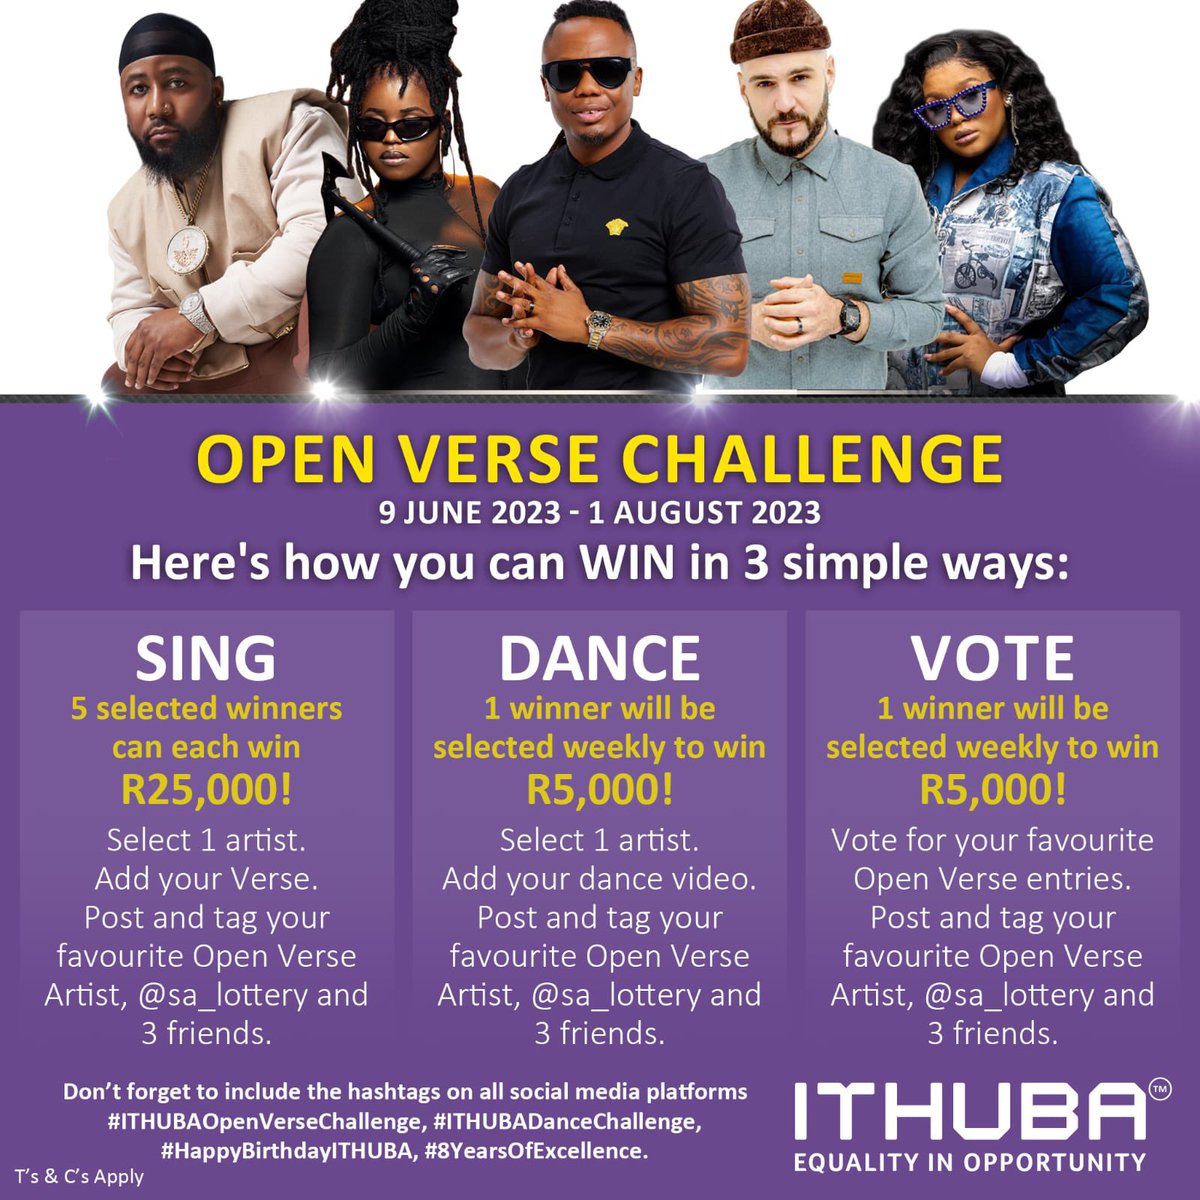 I absolutely love #ITHUBAOpenVerseChallenge 🥳 - Sing or Dance to your favourite #ITHUBADanceChallenge #ITHUBAOpenVerse and you could be singing your way to R25000 - yup easy money 🤌🏽🥳or dance and you could win R5,000! Tag 3 of your friends @sa_lottery #Ad